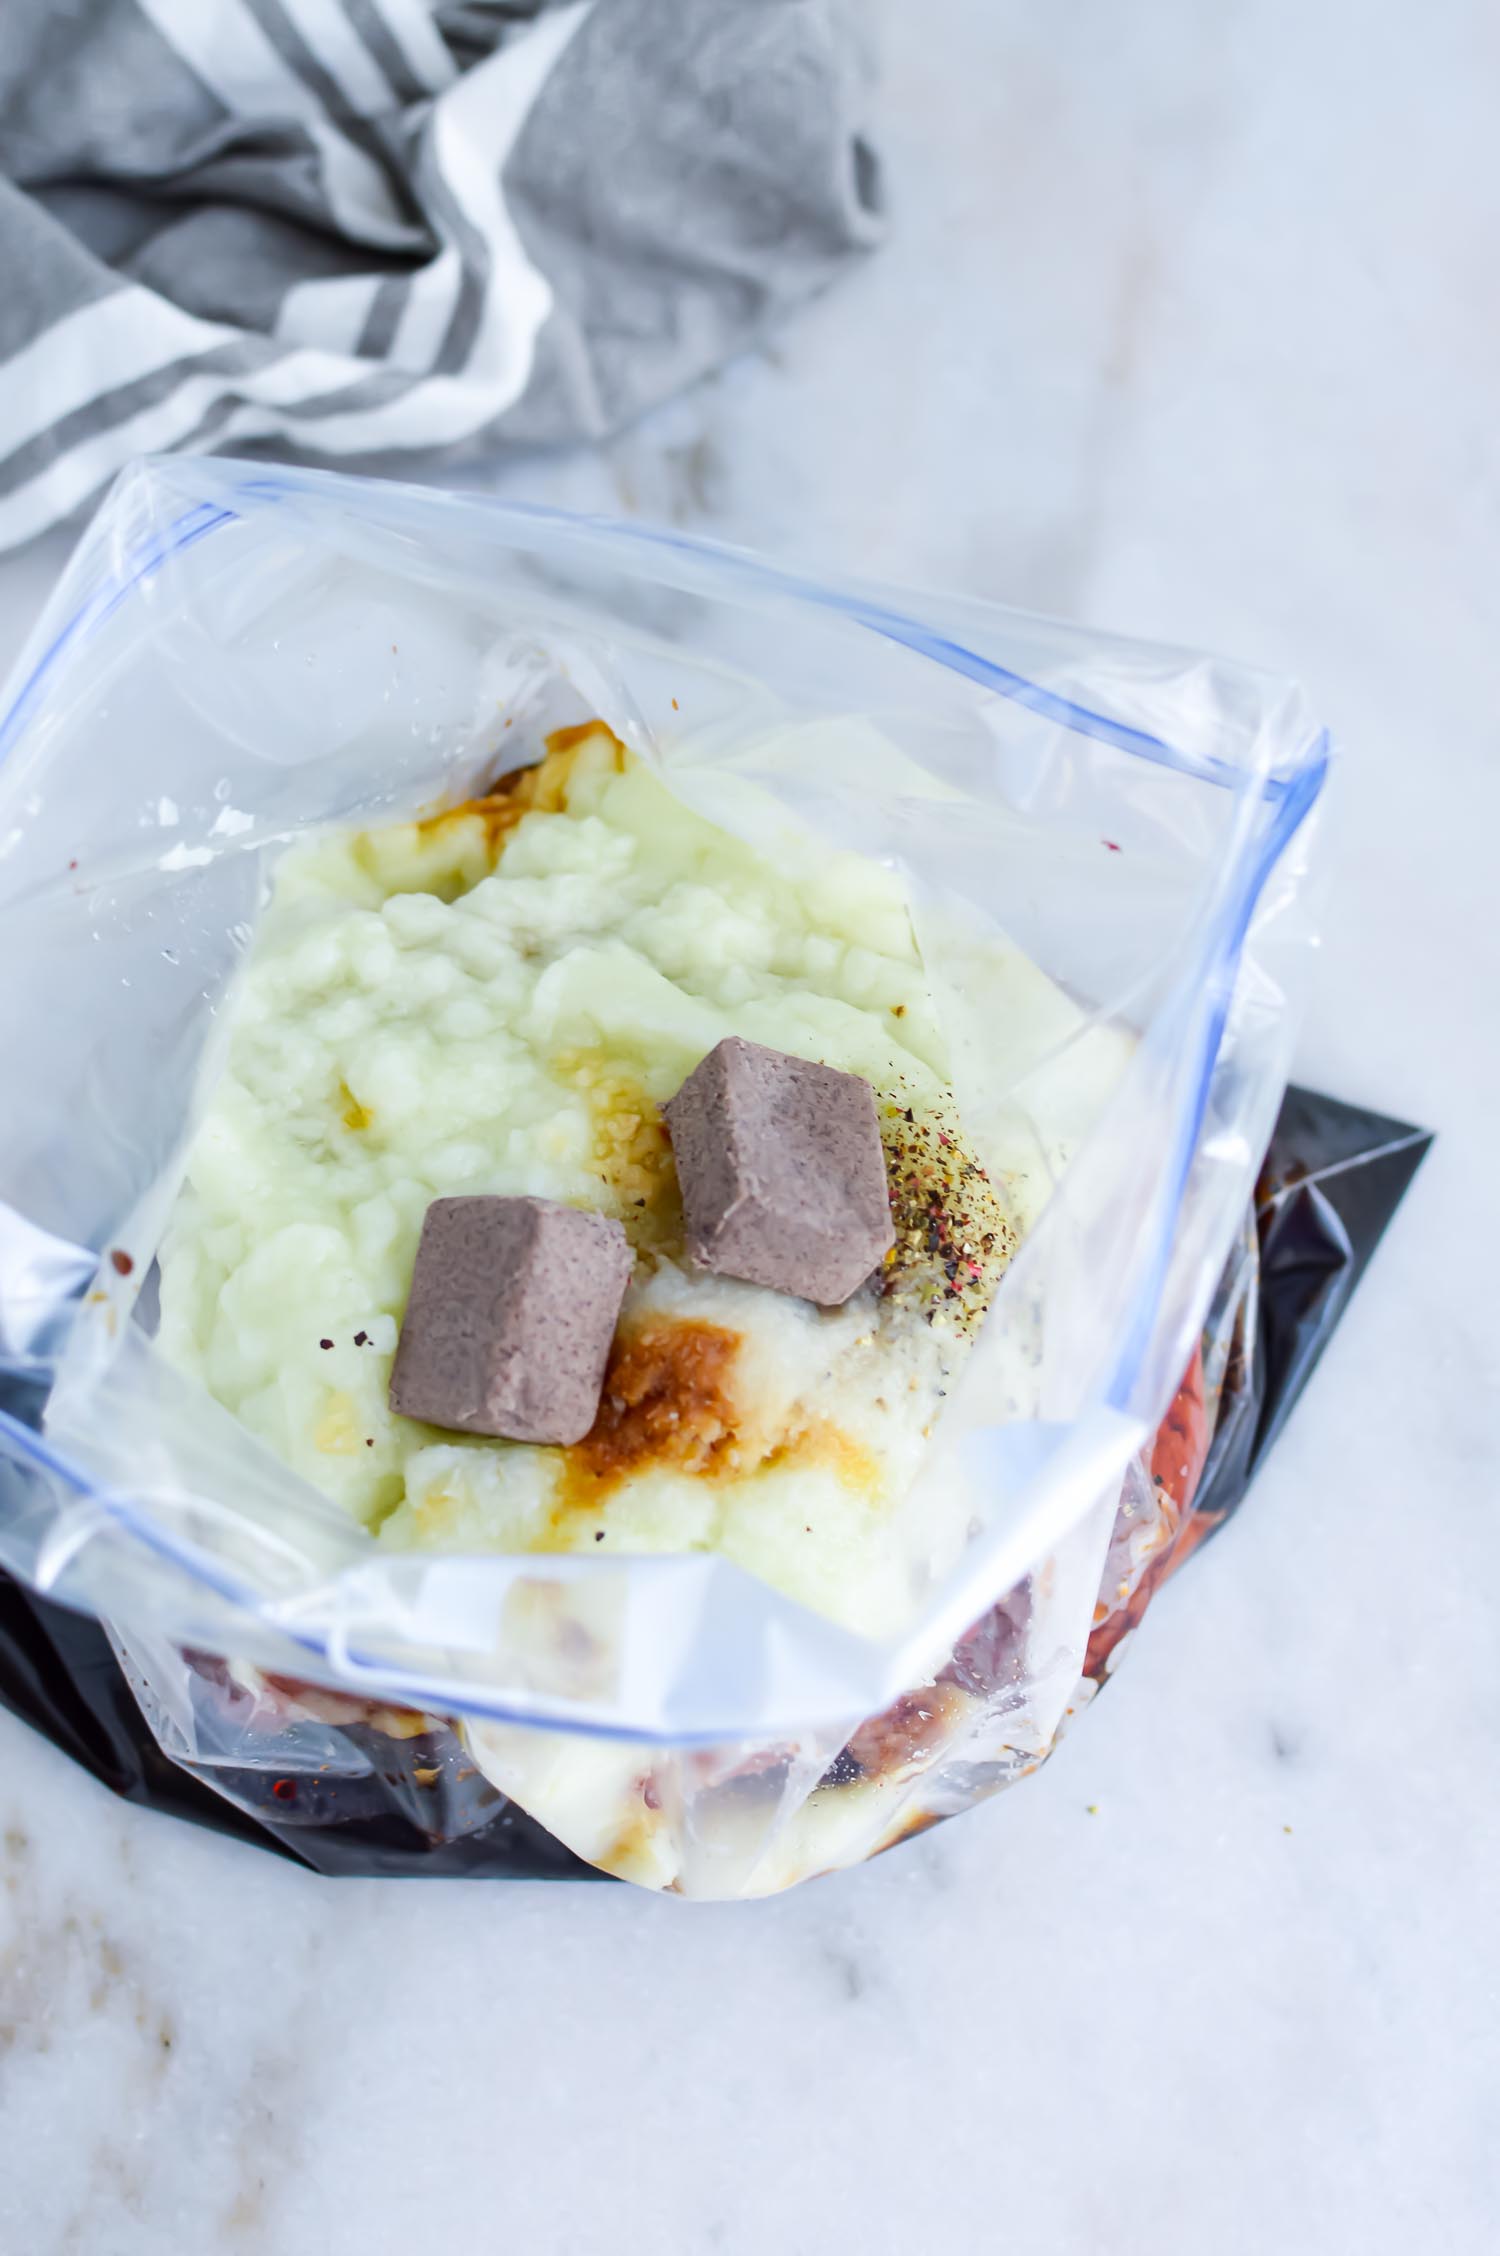 An open gallon resealable bag with potatoes, meat, seasoning cubes and spices in it.